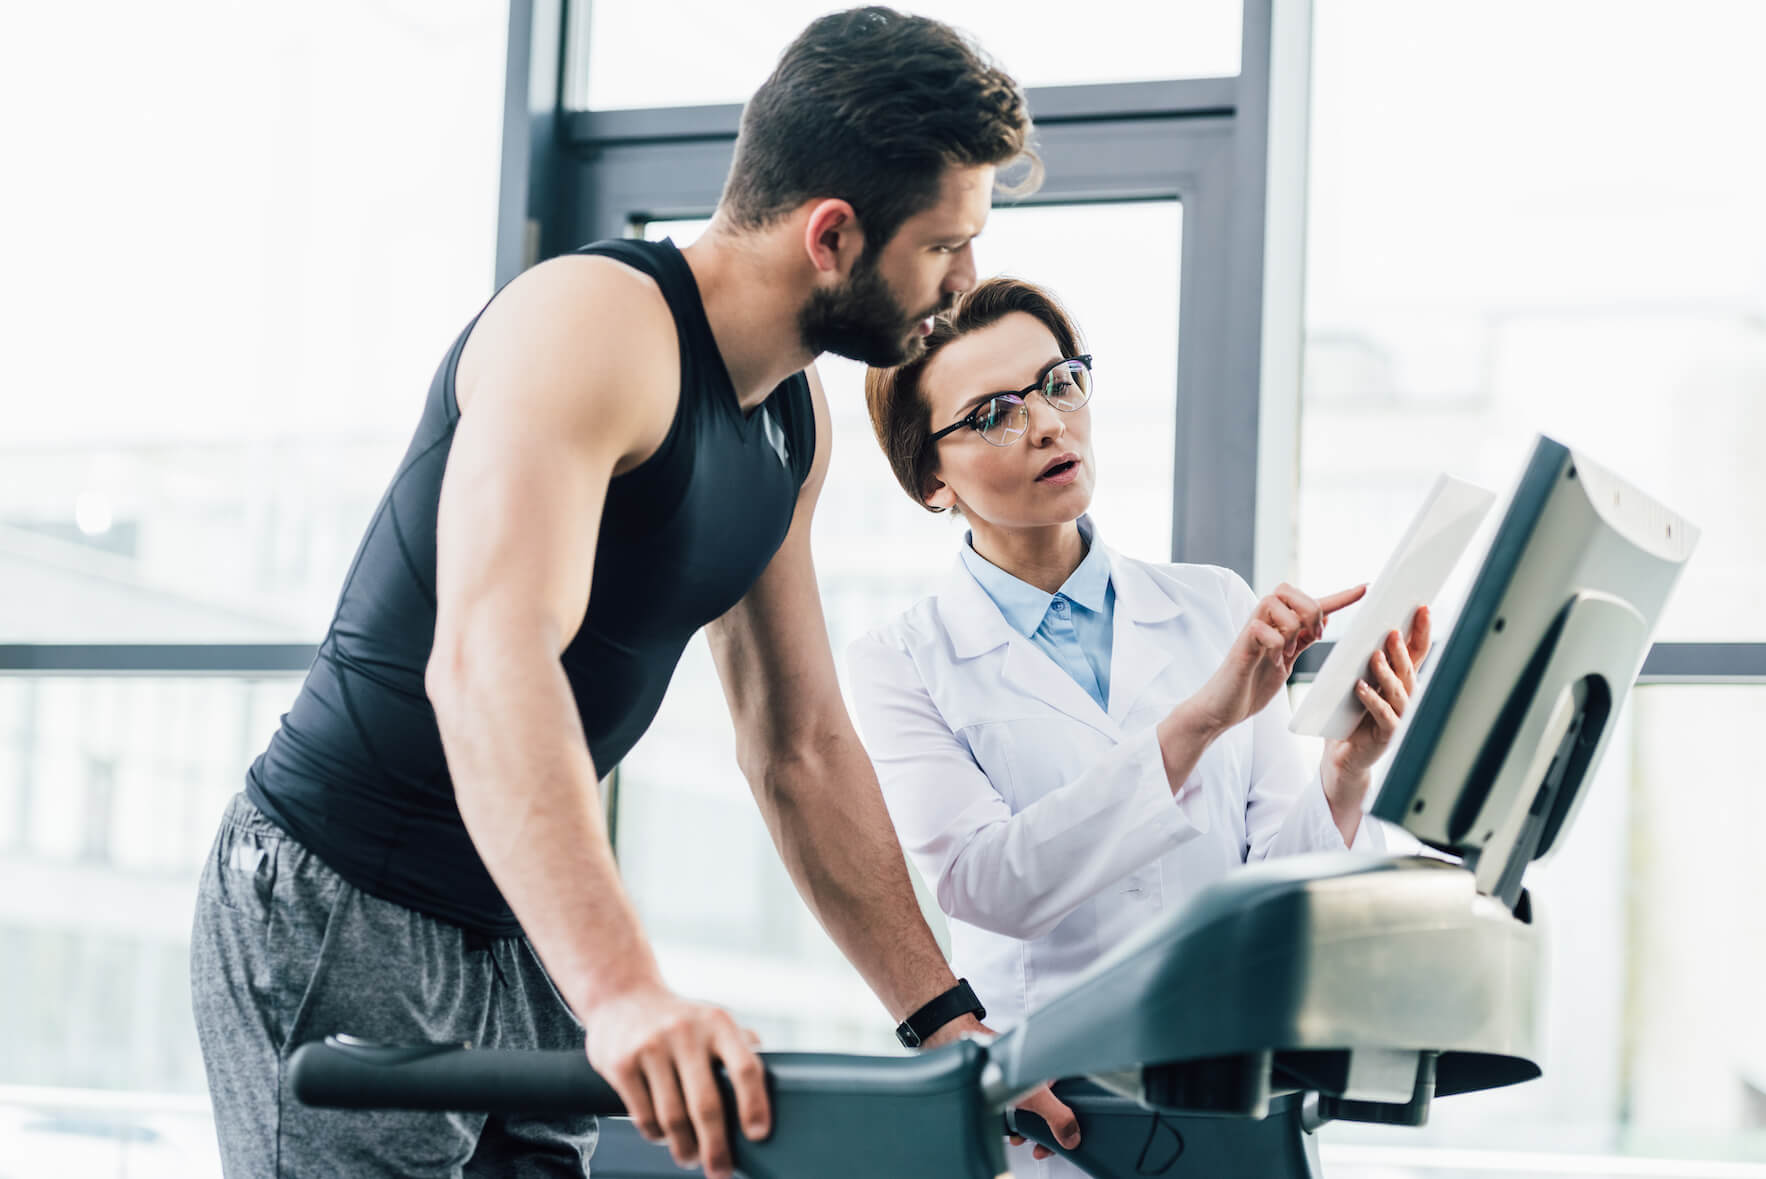 doctor showing person on treadmill information on screen